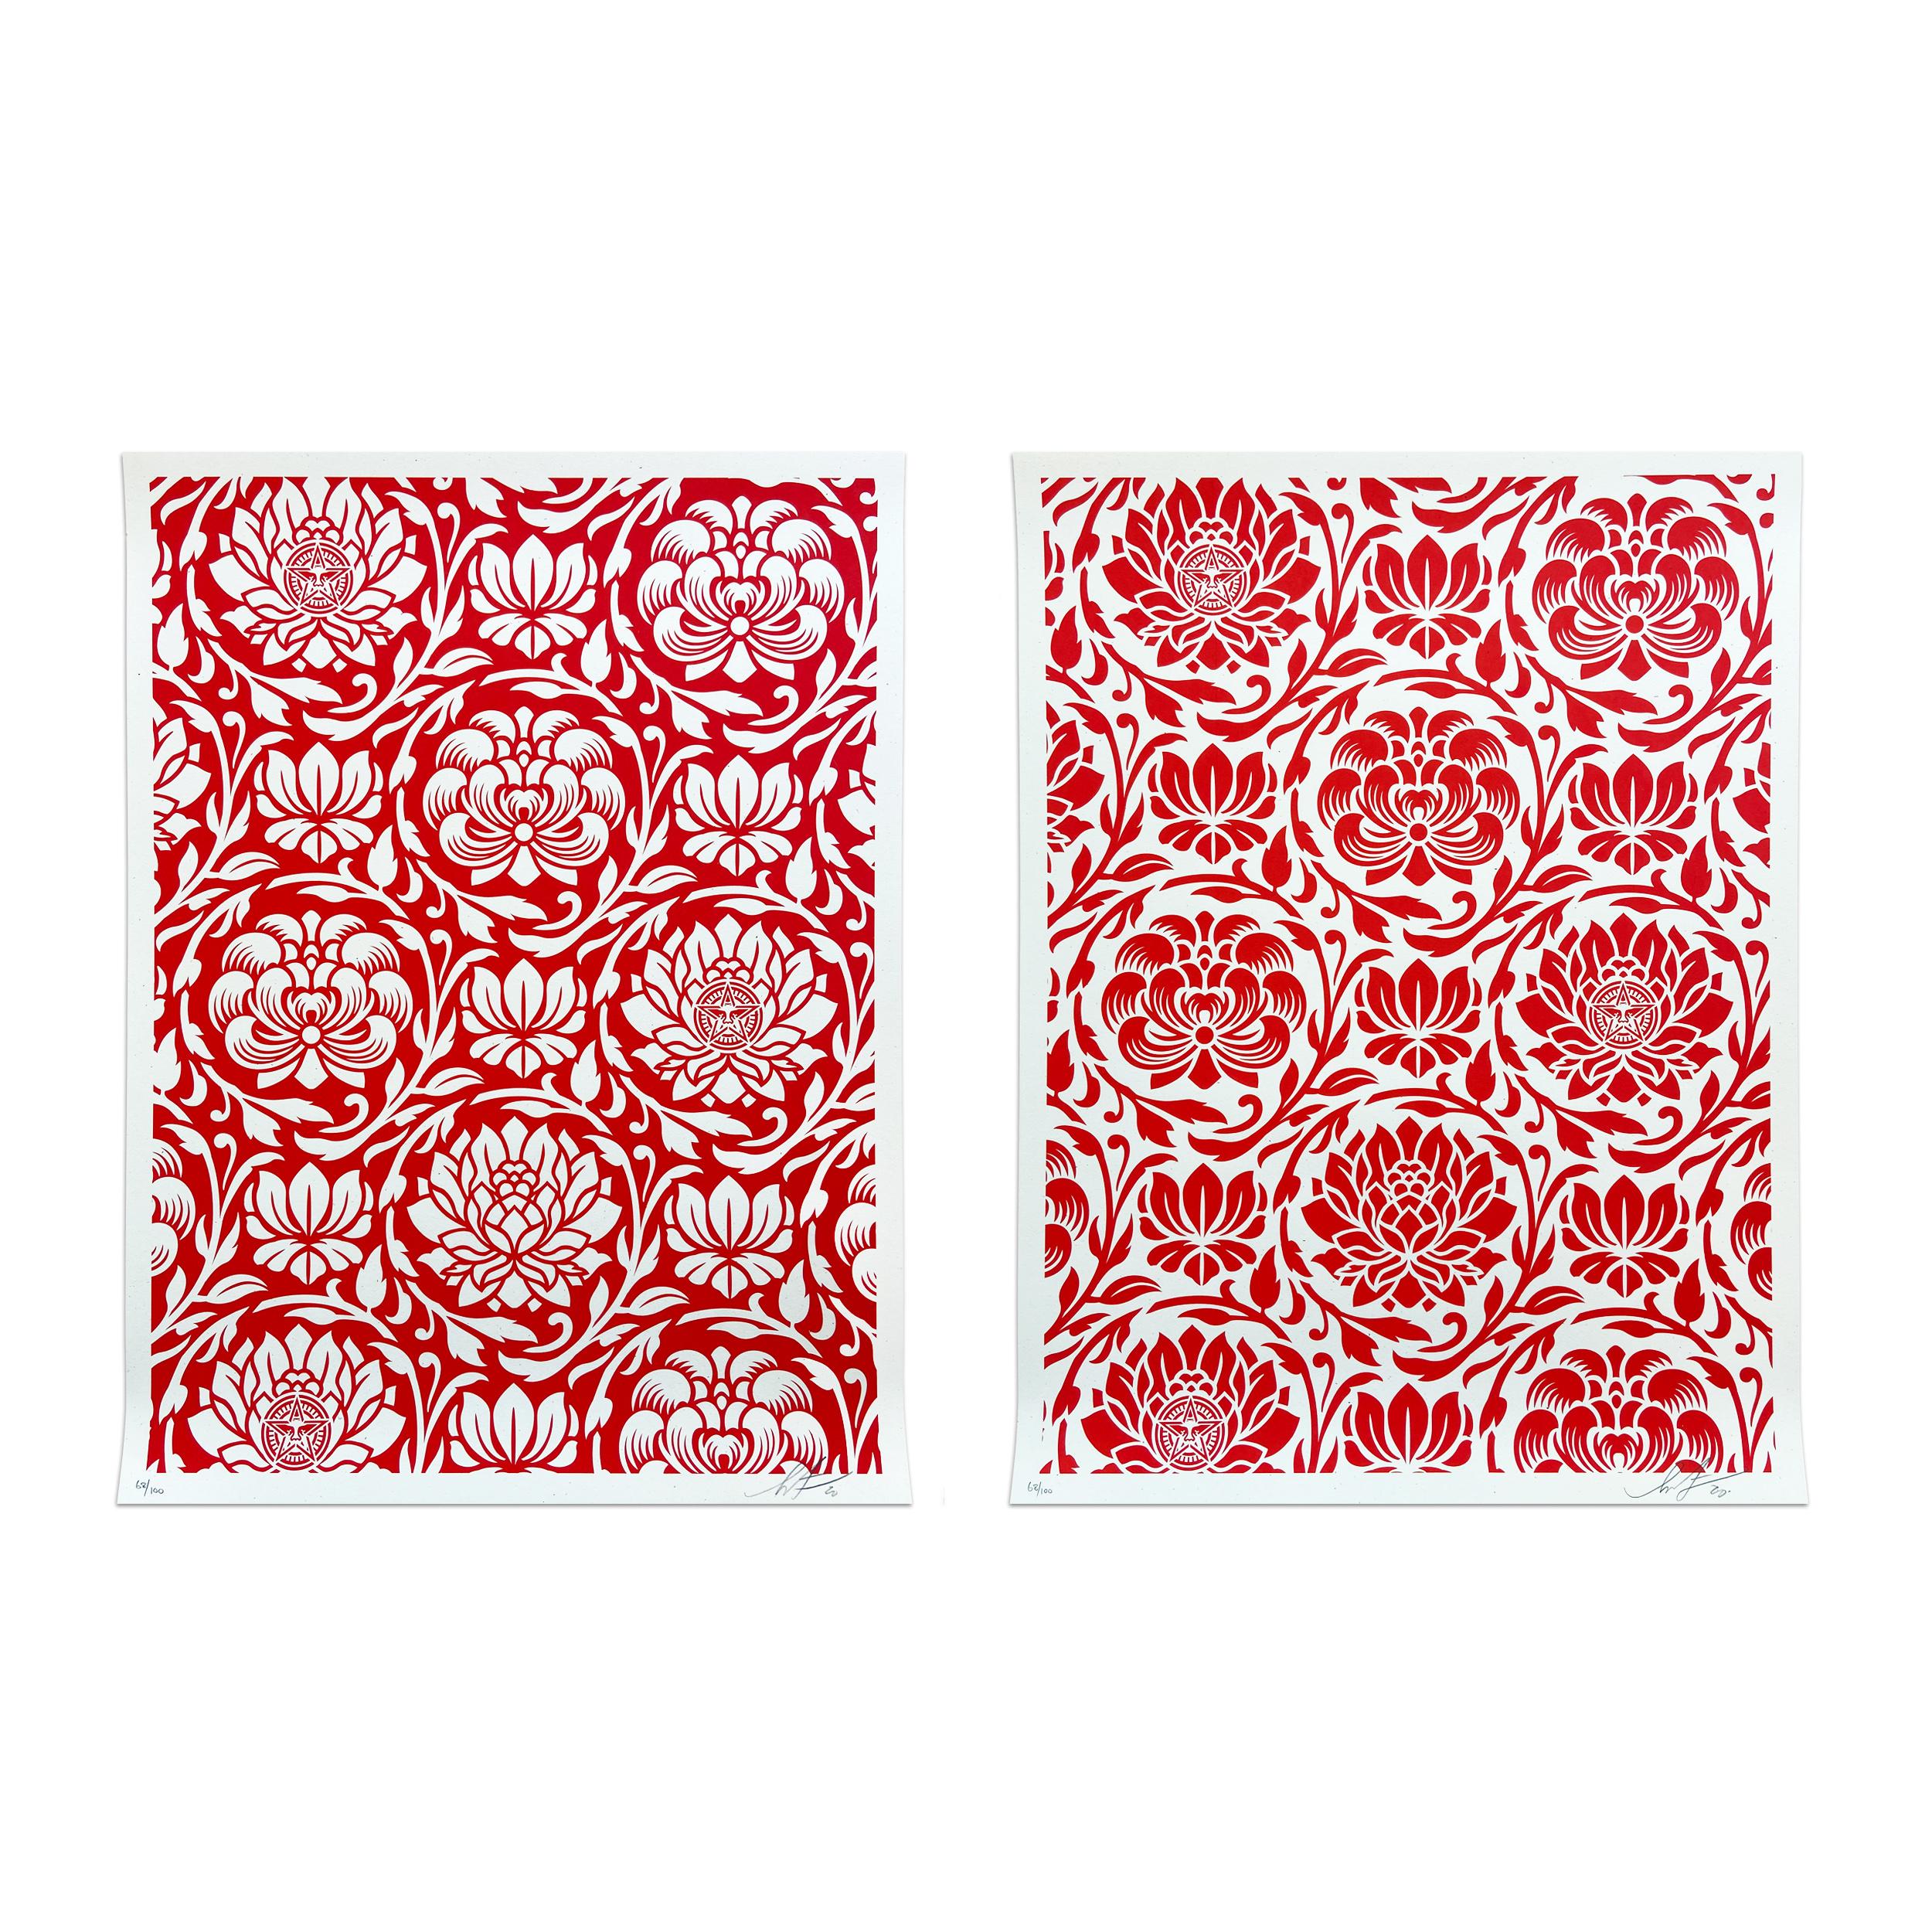 Shepard Fairey (American, b. 1970)
Floral Harmony (Red Yin/Yang), 2020
Medium: 2 screenprints on paper
Dimensions: each 24 x 18 in (61 x 46 cm)
Edition of 100: Each hand signed and numbered in pencil
Condition: Mint